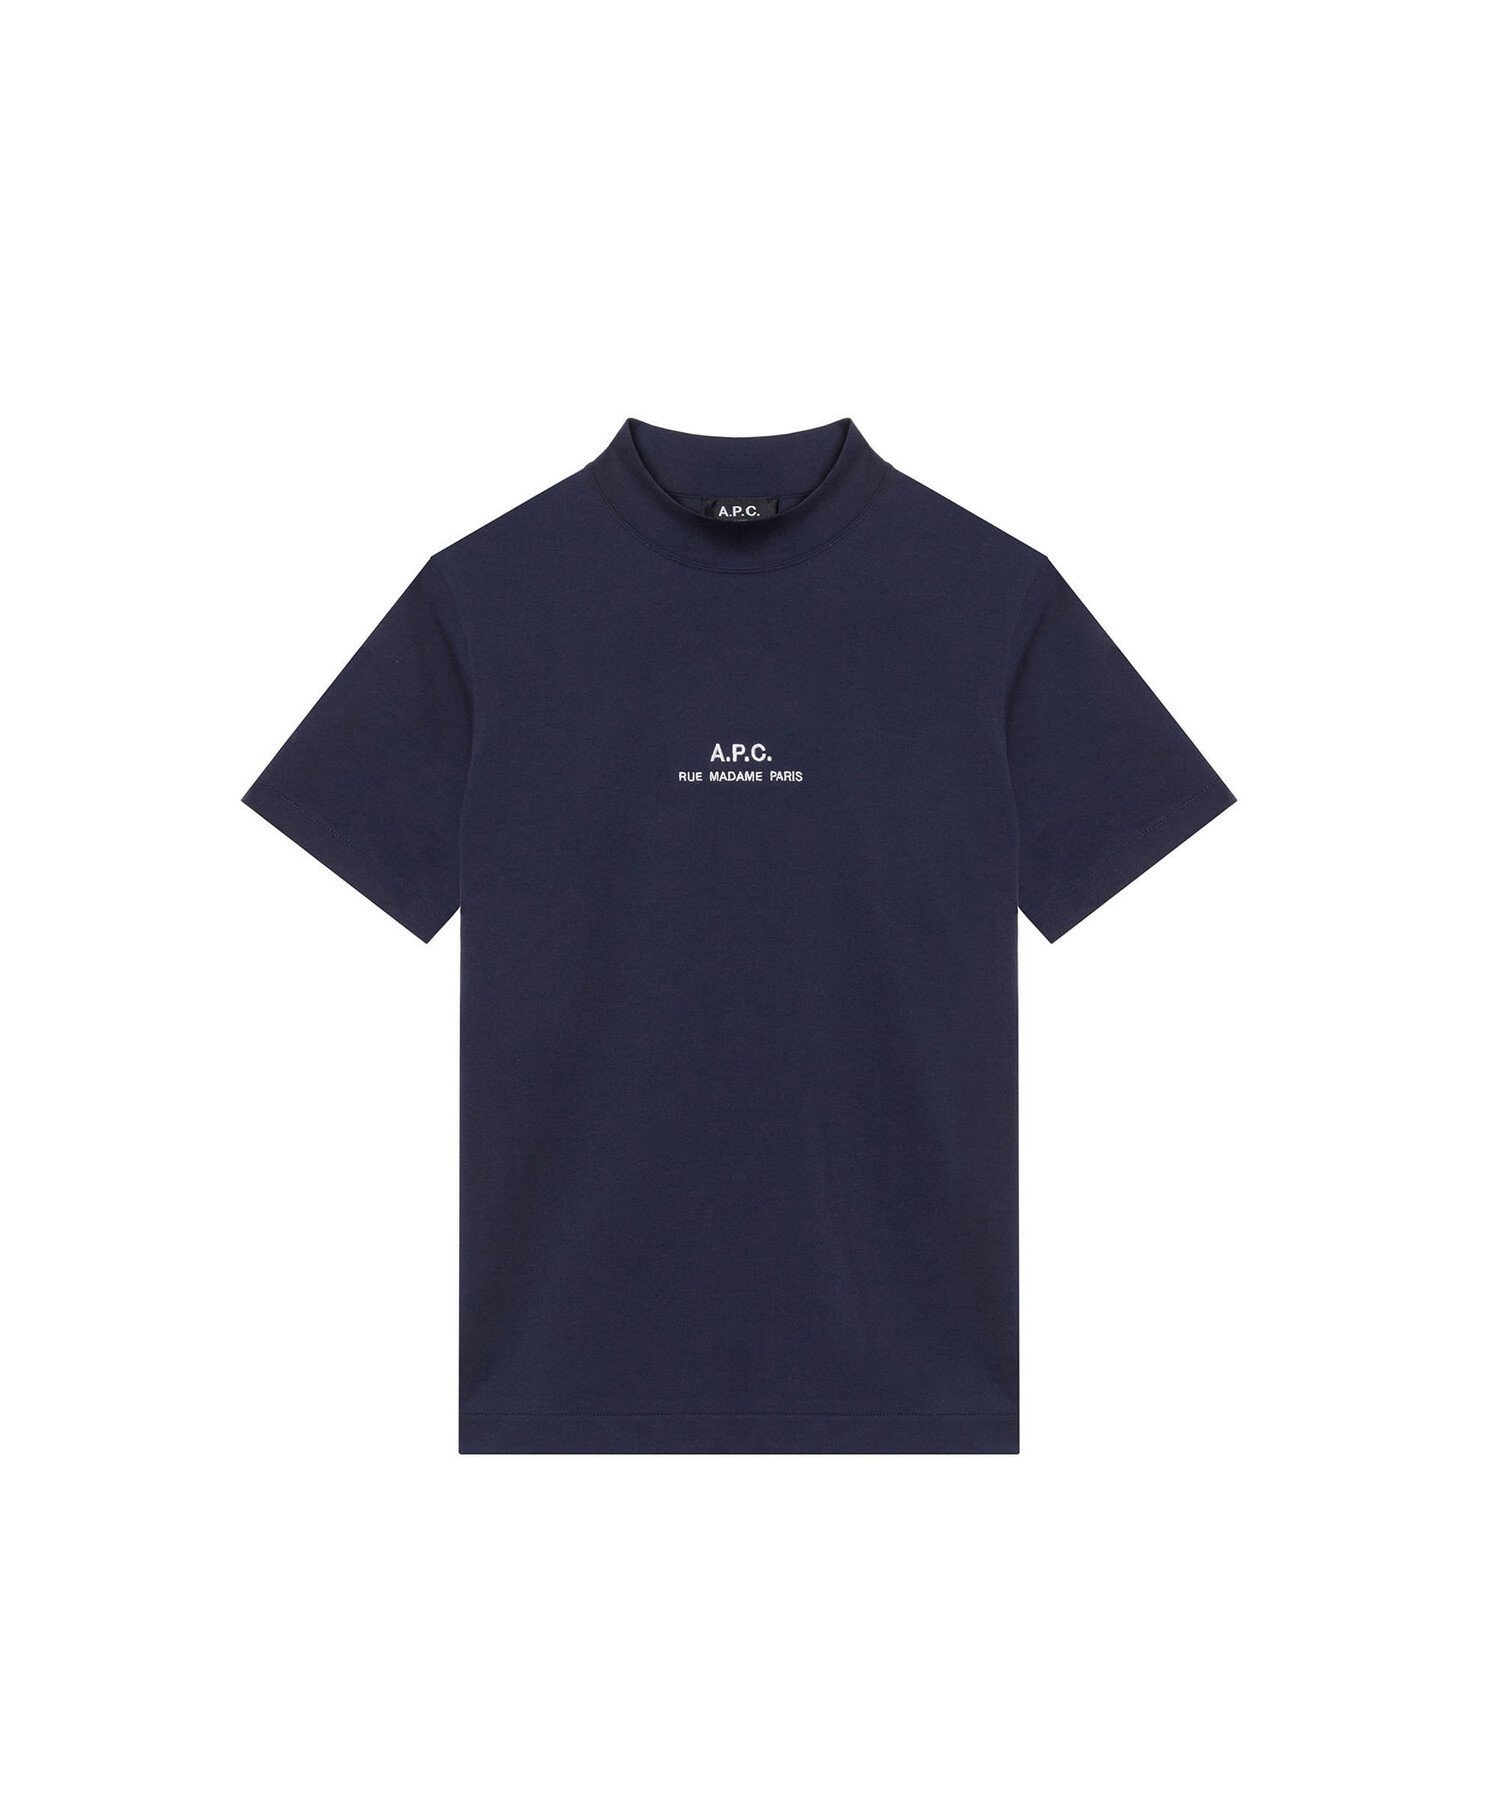 A.P.C. Petite Rue Madame Tシャツ アー・ぺー・セー トップス カットソー・Tシャツ ホワイト【送料無料】